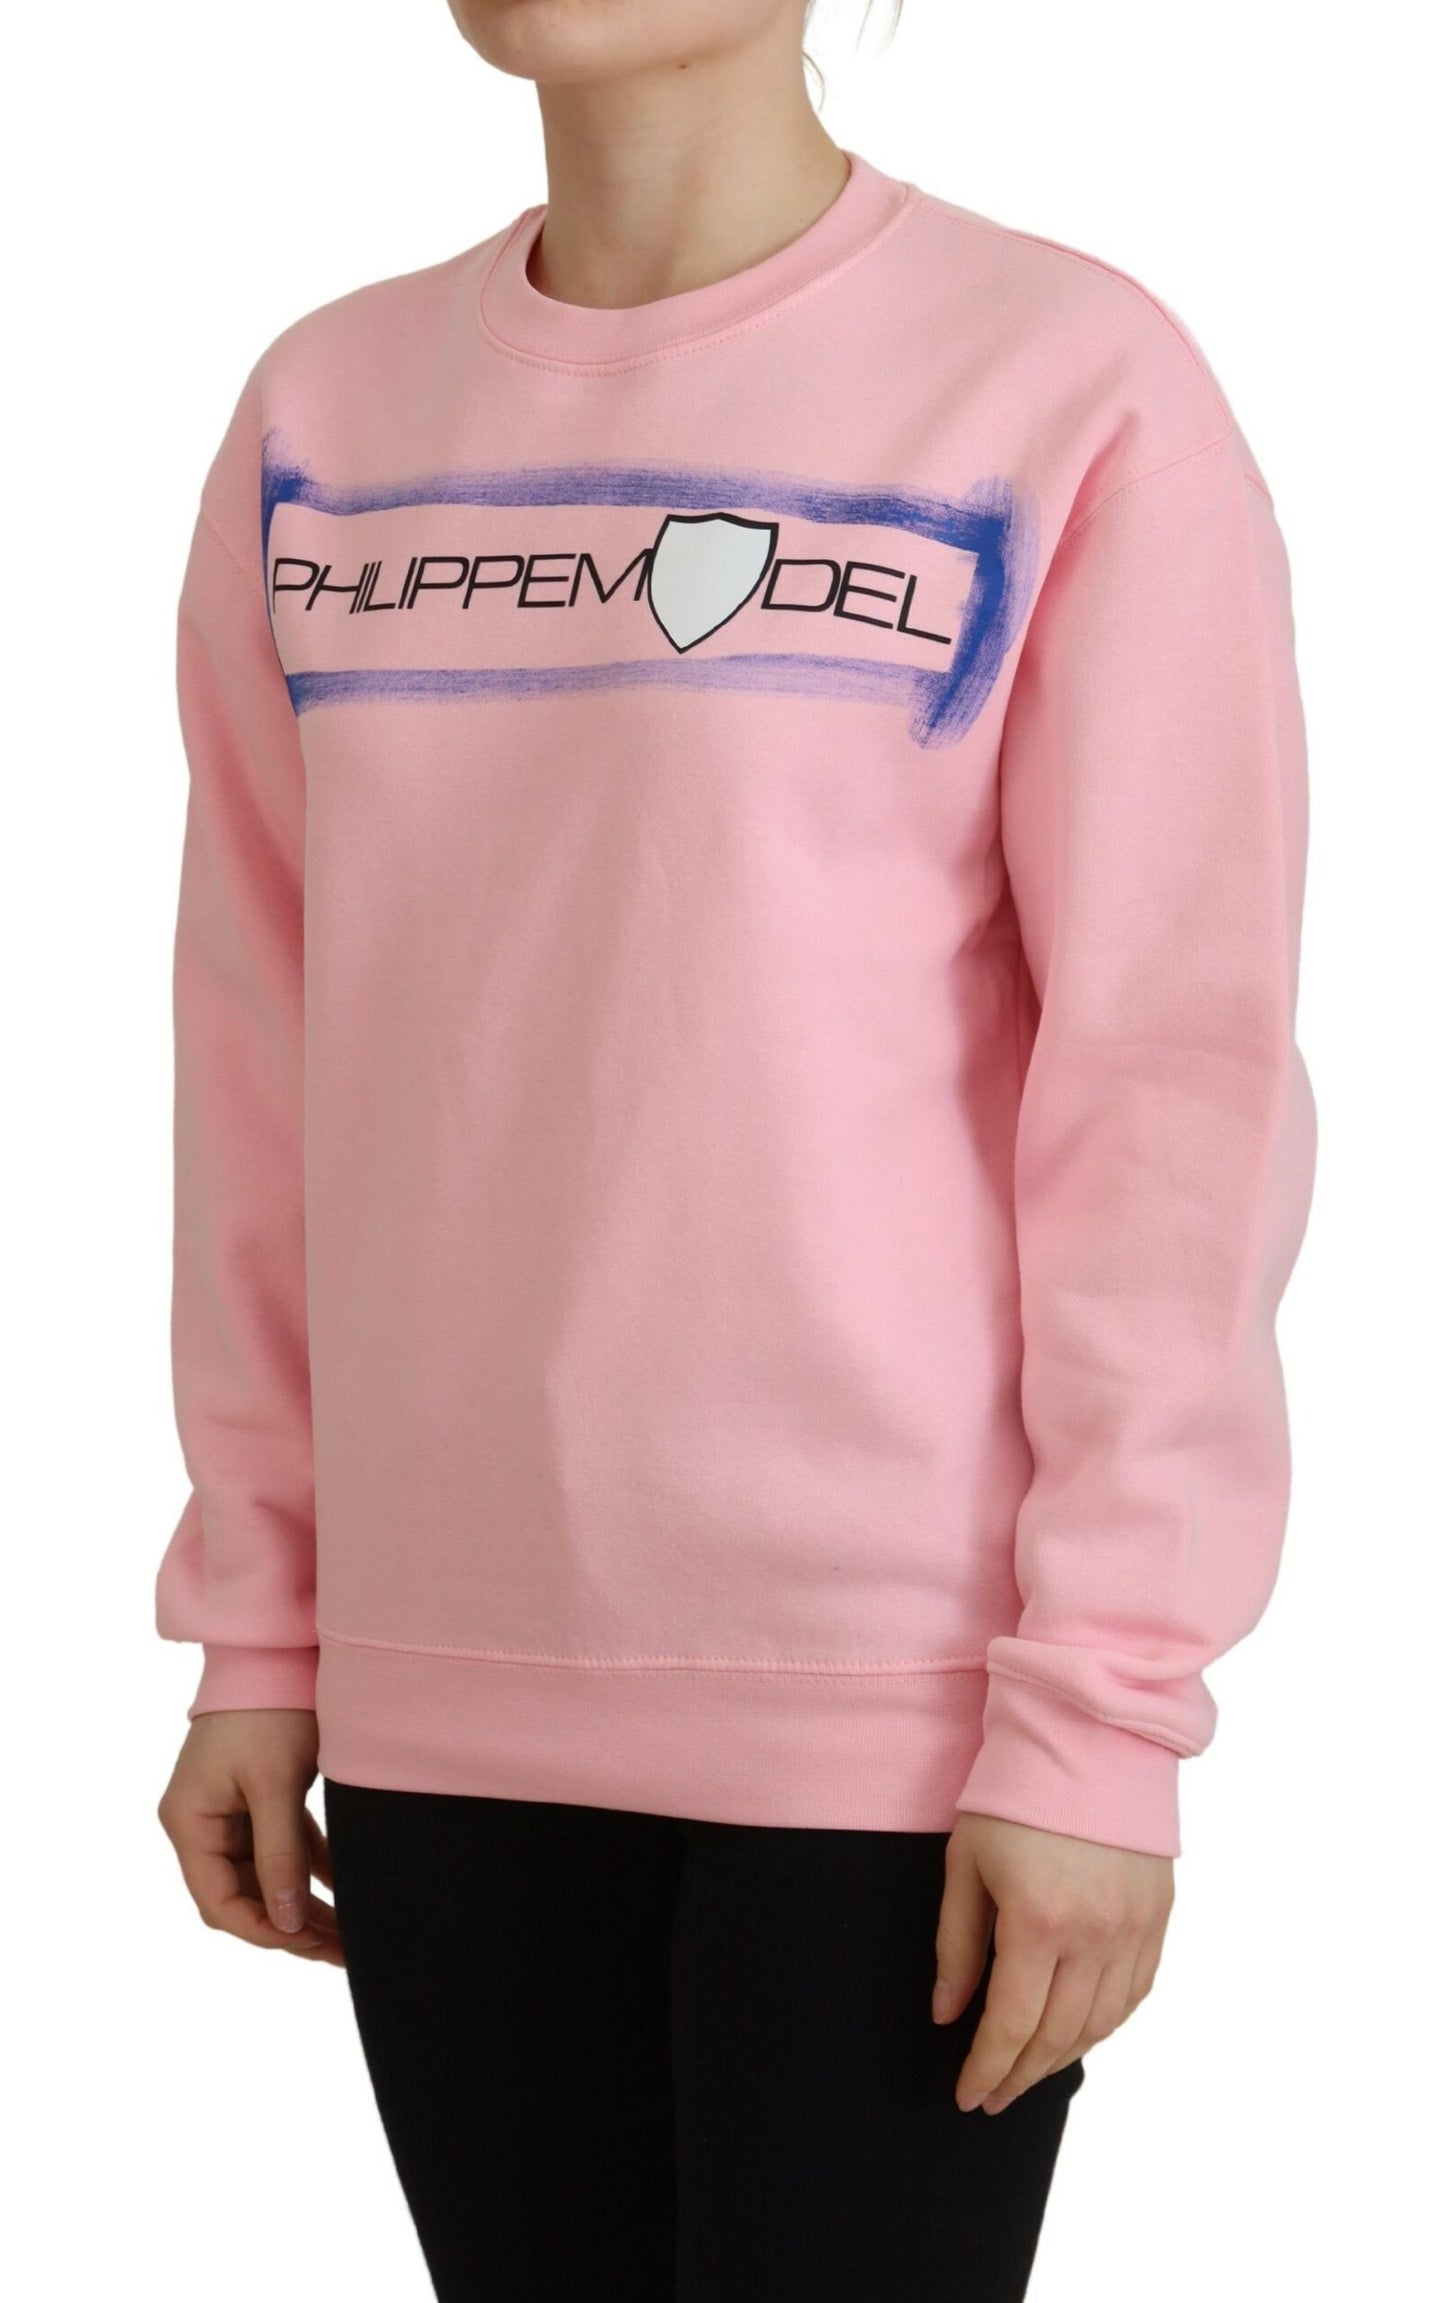 Philippe Model Women's Pink Printed Long Sleeves Pullover Sweater